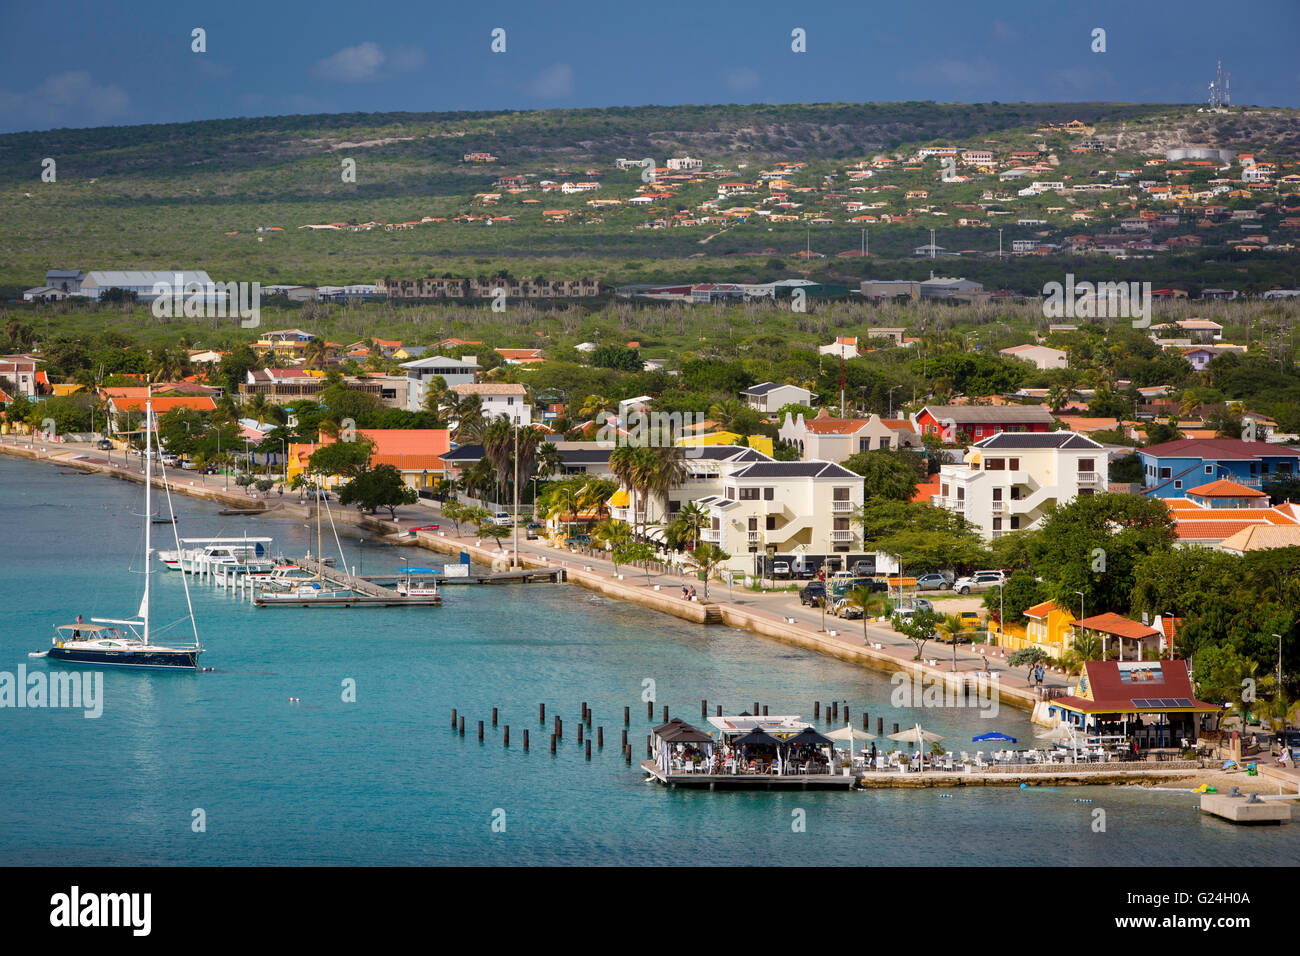 Sailboats and town of Kralendijk on the Caribbean island of Bonaire, West Indies Stock Photo